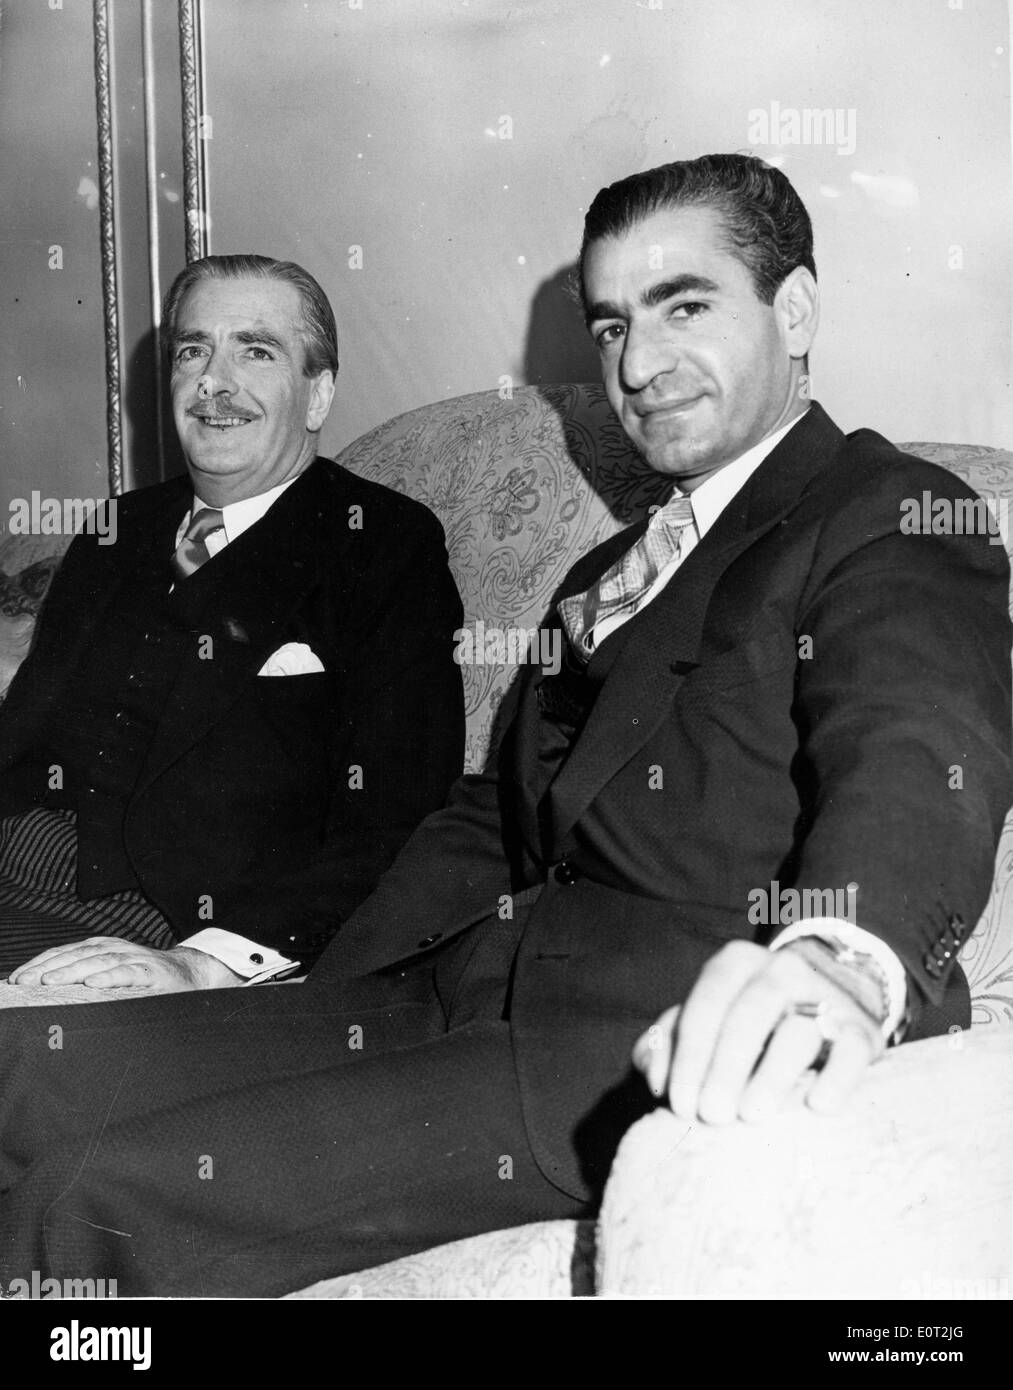 Prime Minister Anthony Eden During Meeting Stock Photo Alamy